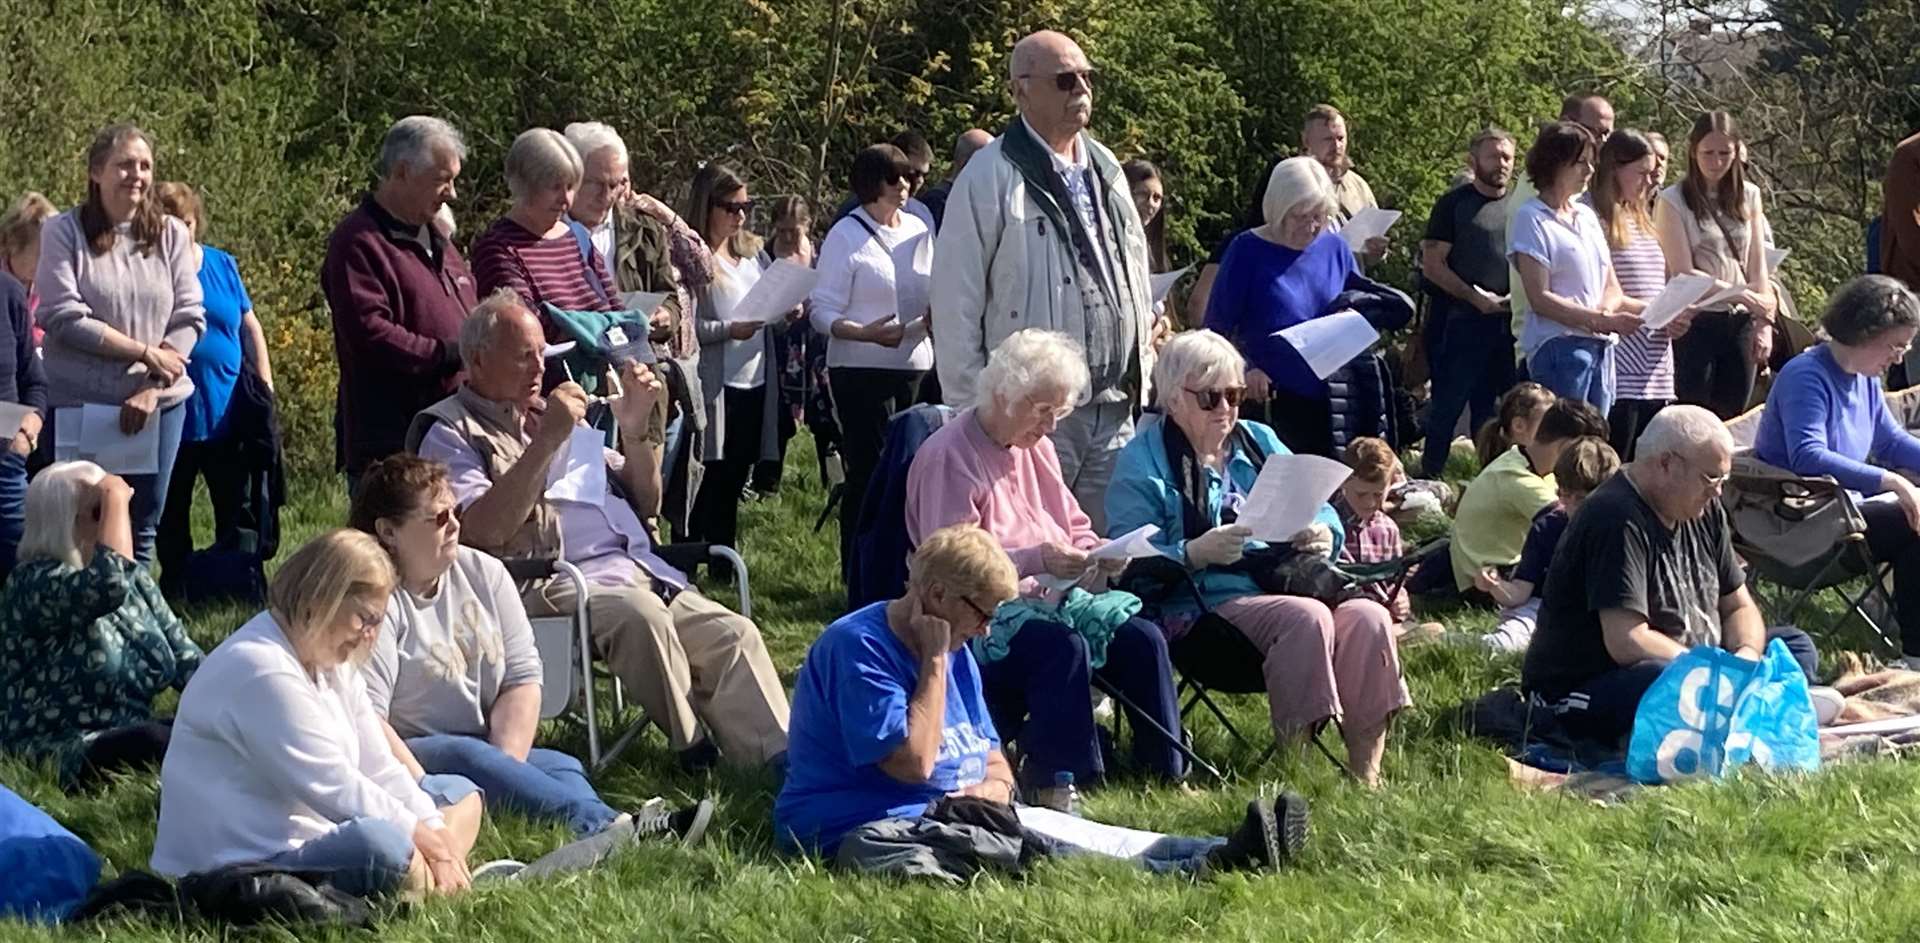 Some of the crowd at the Good Friday Easter service at Bunny Bank, Minster